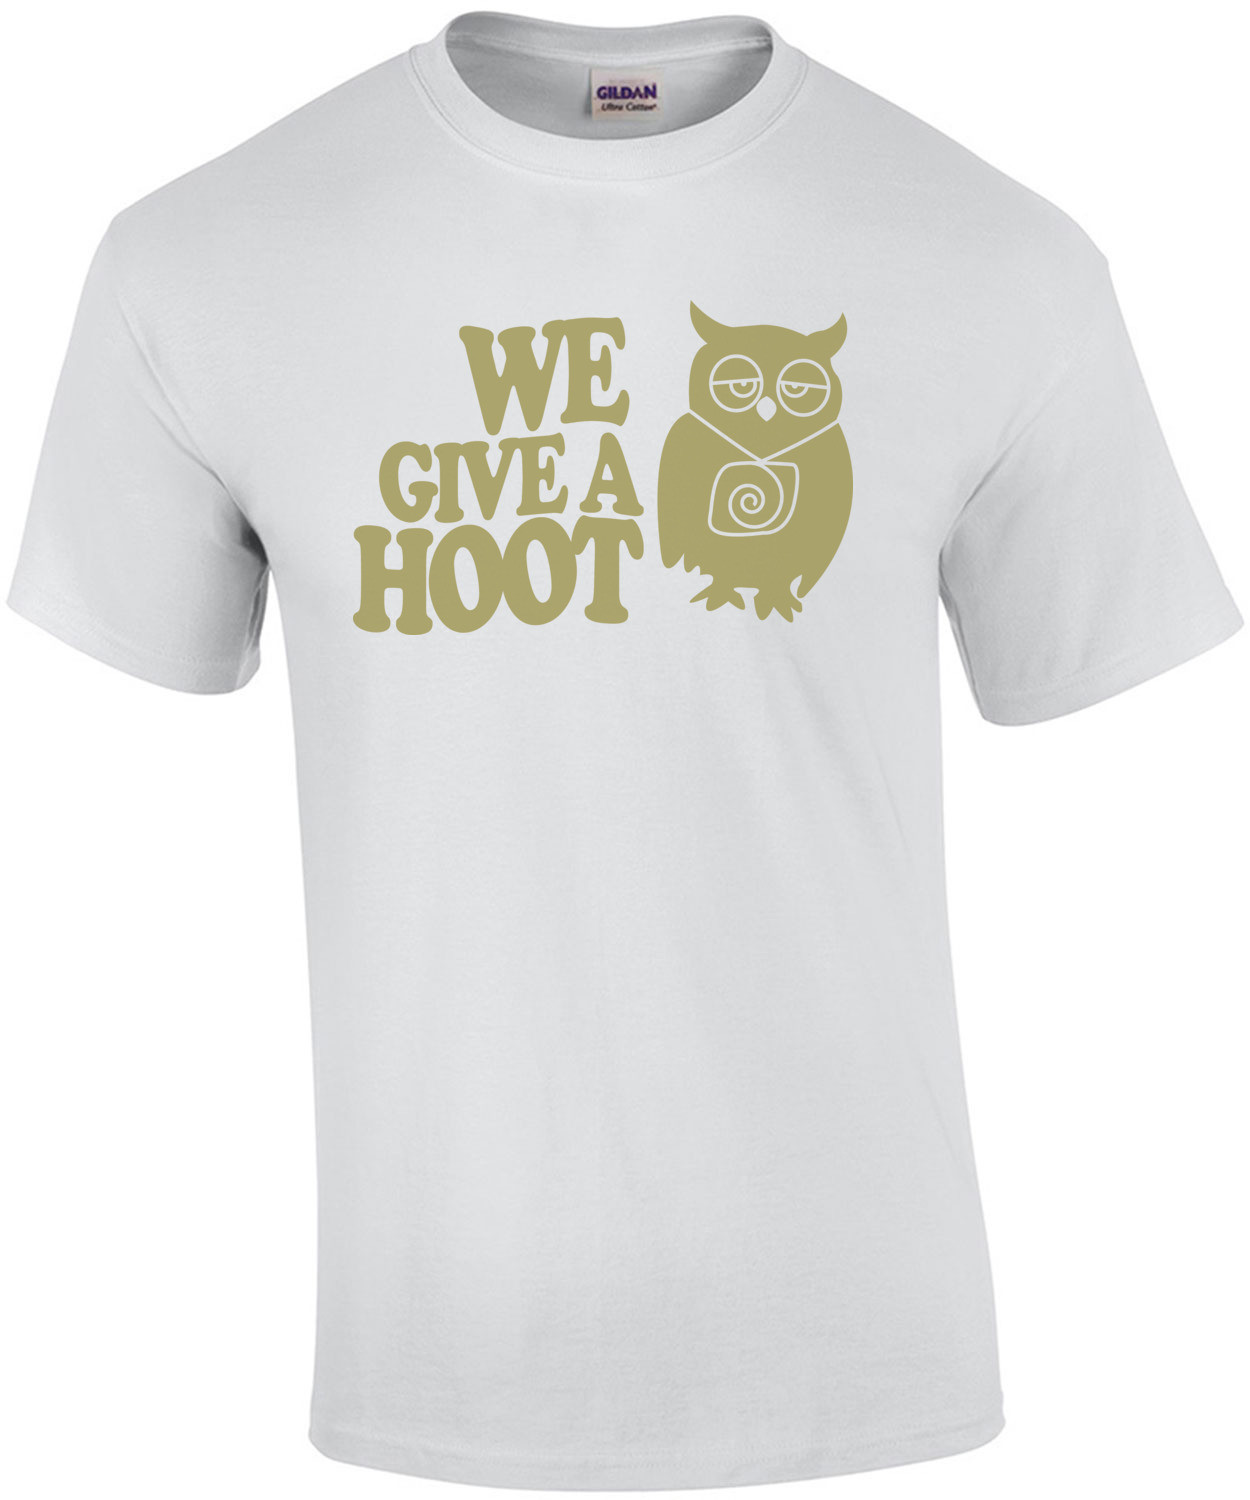 We Give a Hoot - Funny Owl T-Shirt